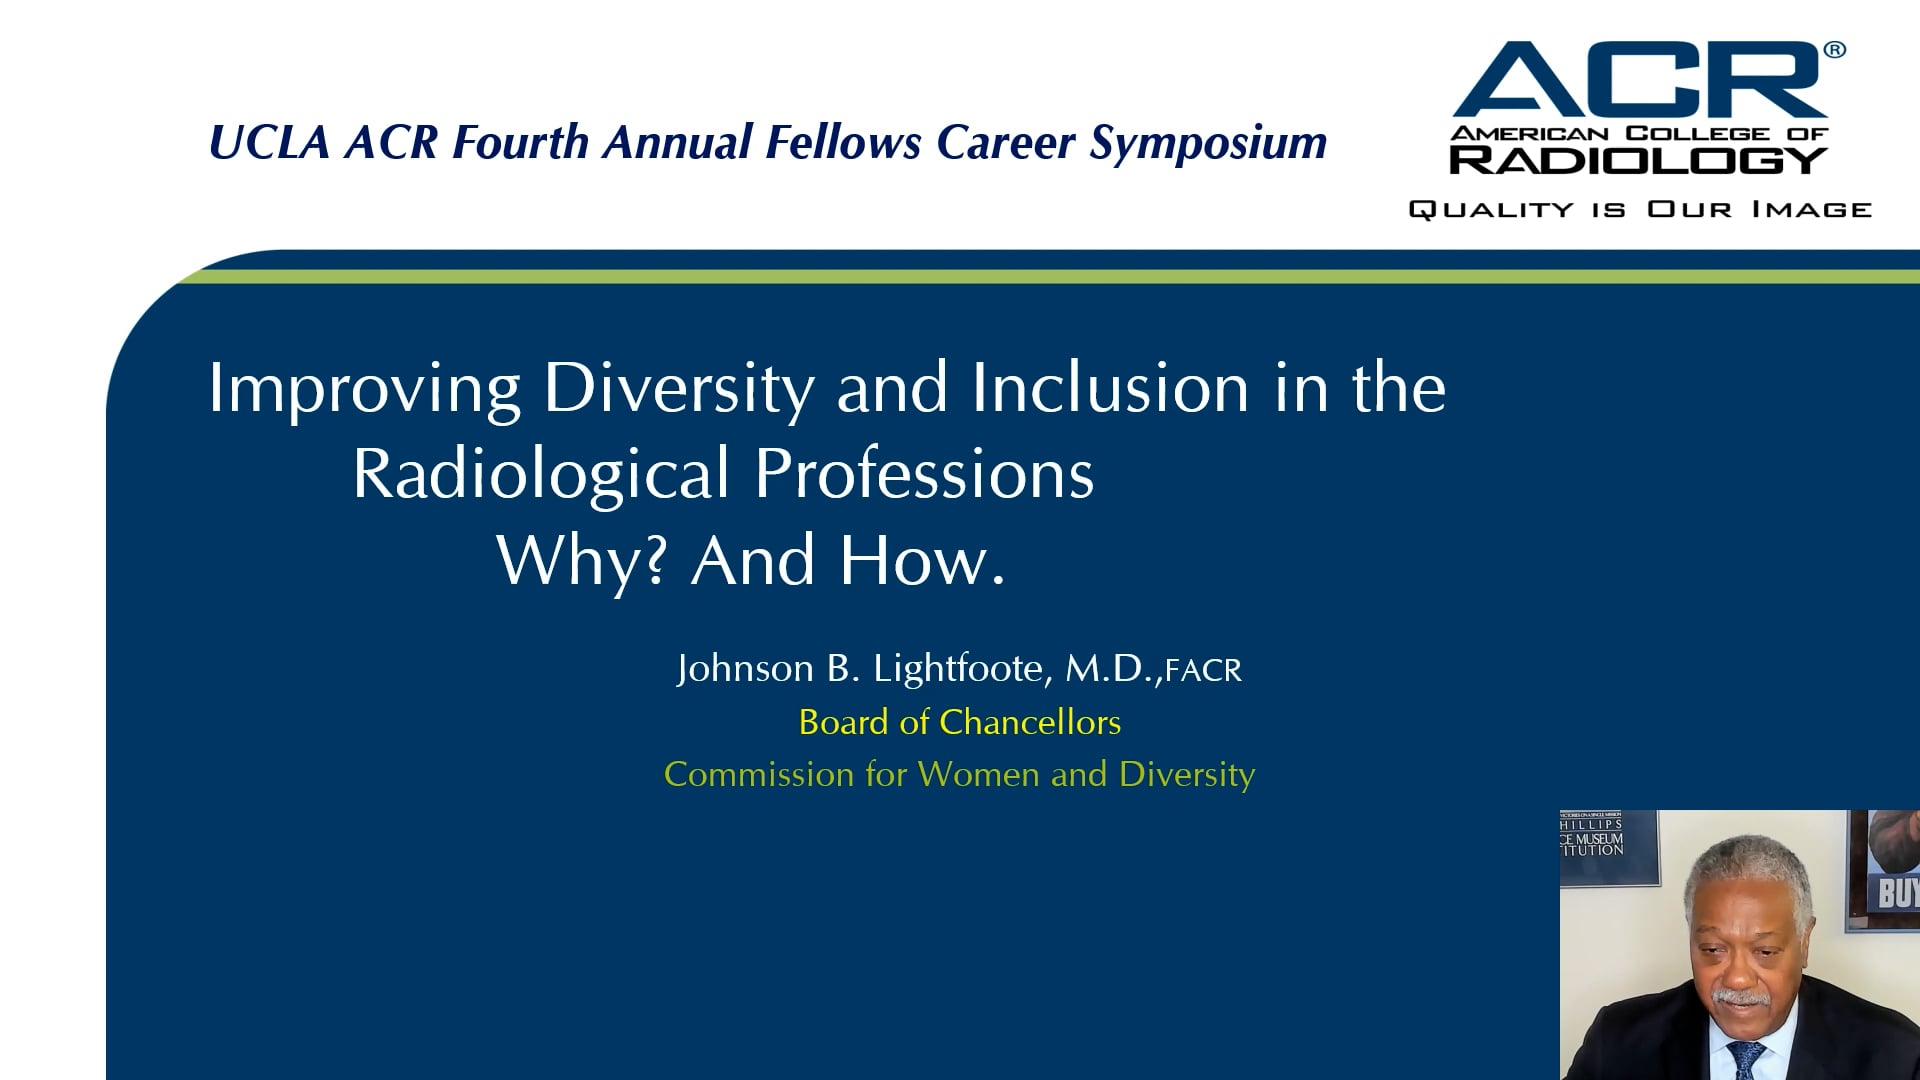 Improving Diversity and Inclusion in the Radiological Professions: Why and How?